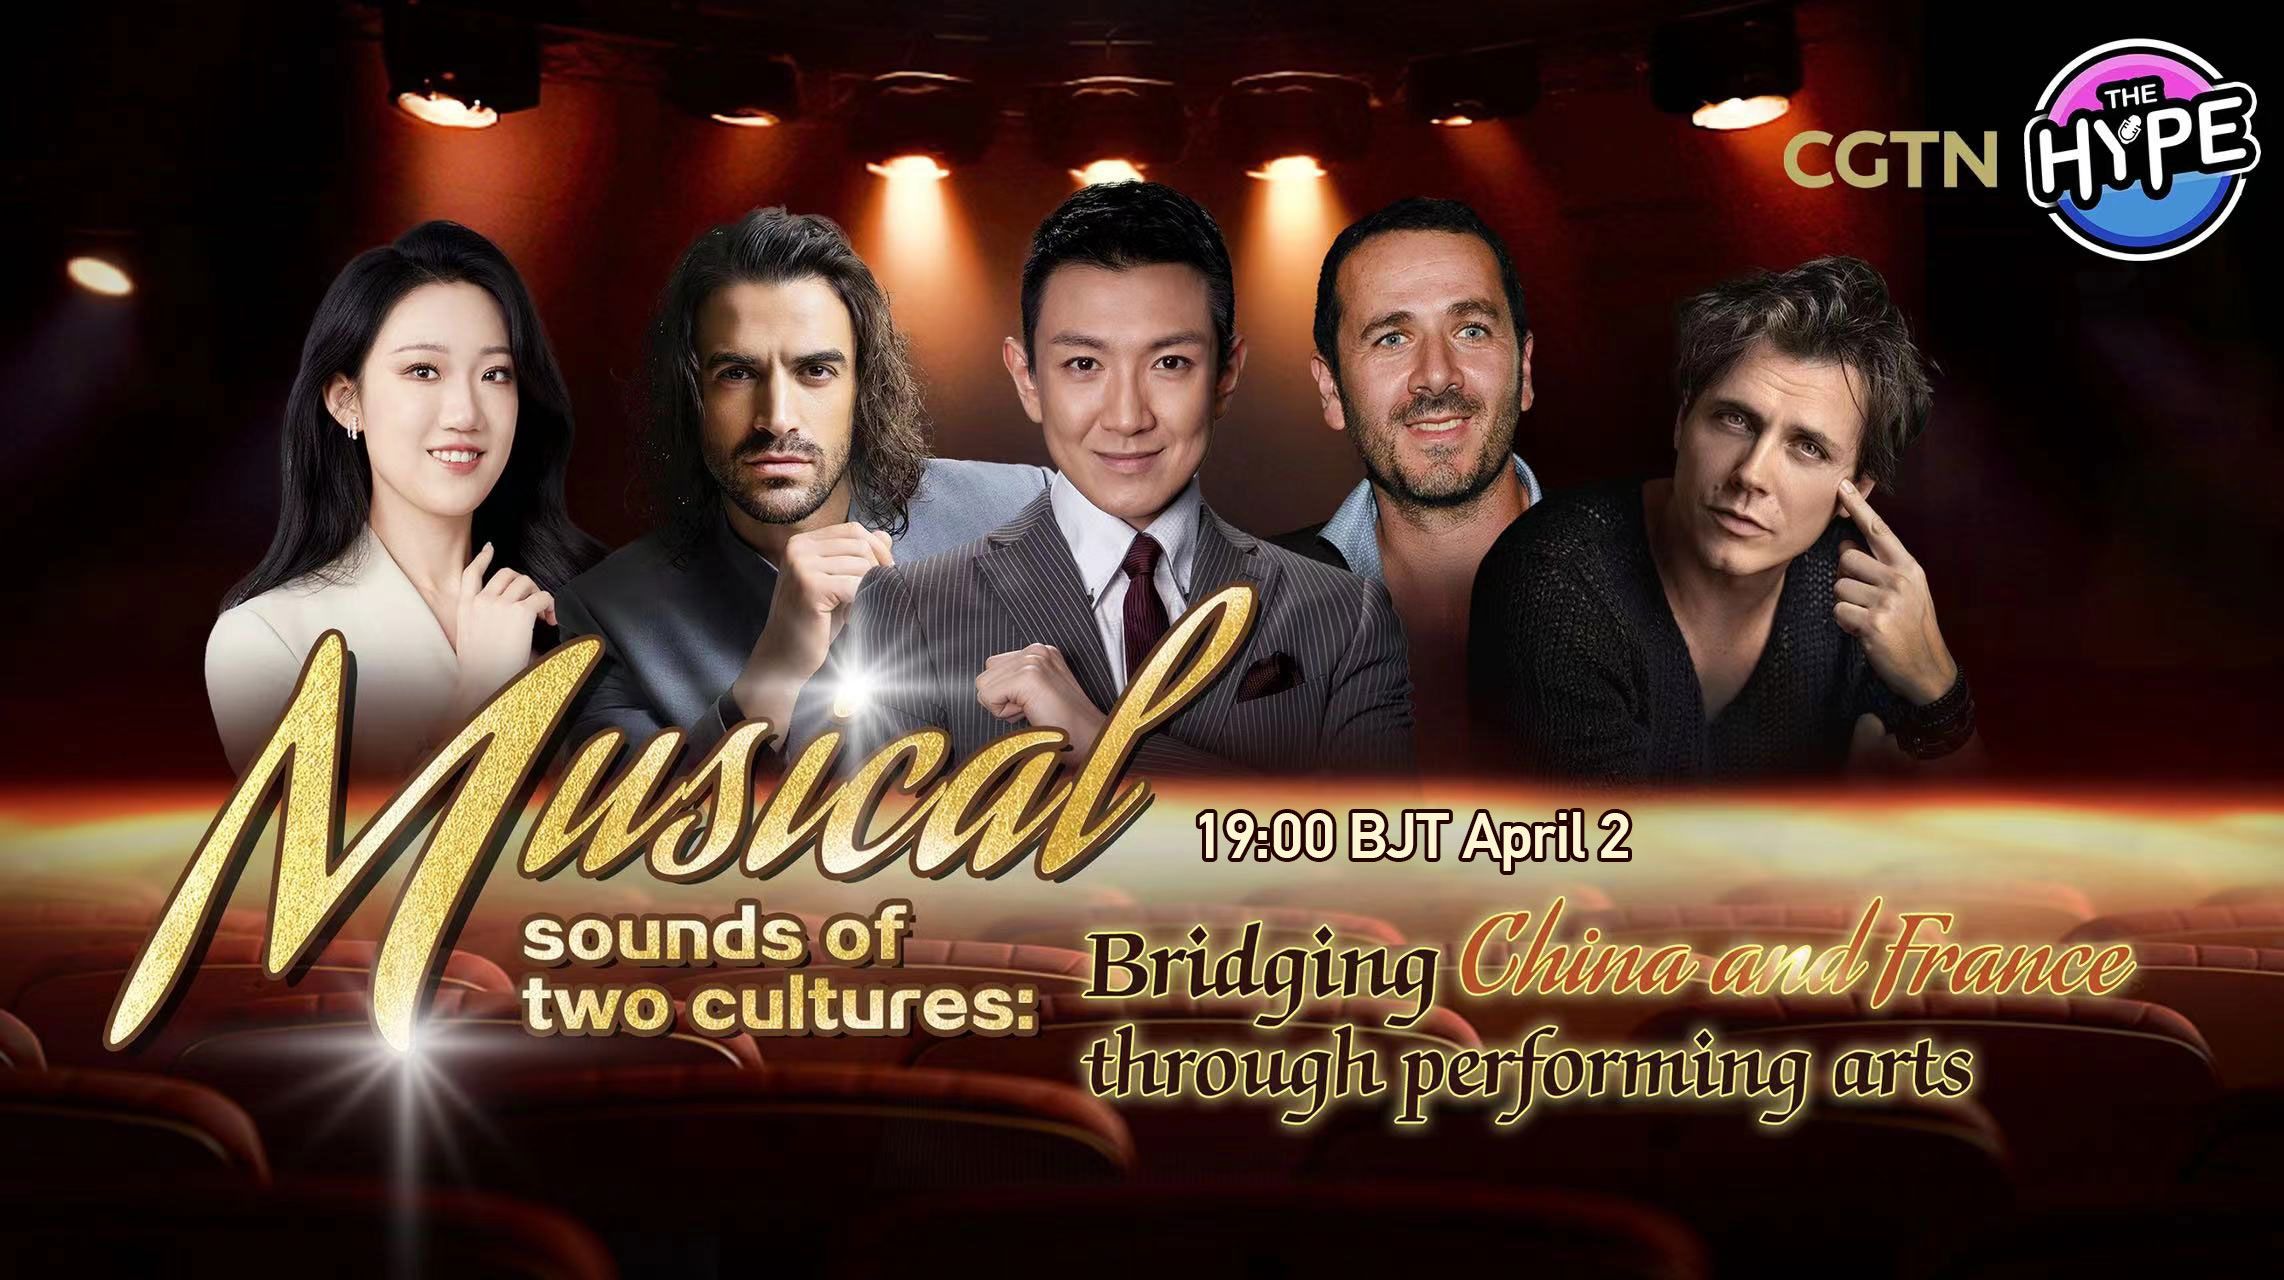 Live: THE HYPE – Musical sounds of two cultures: Bridging China and France through performing arts